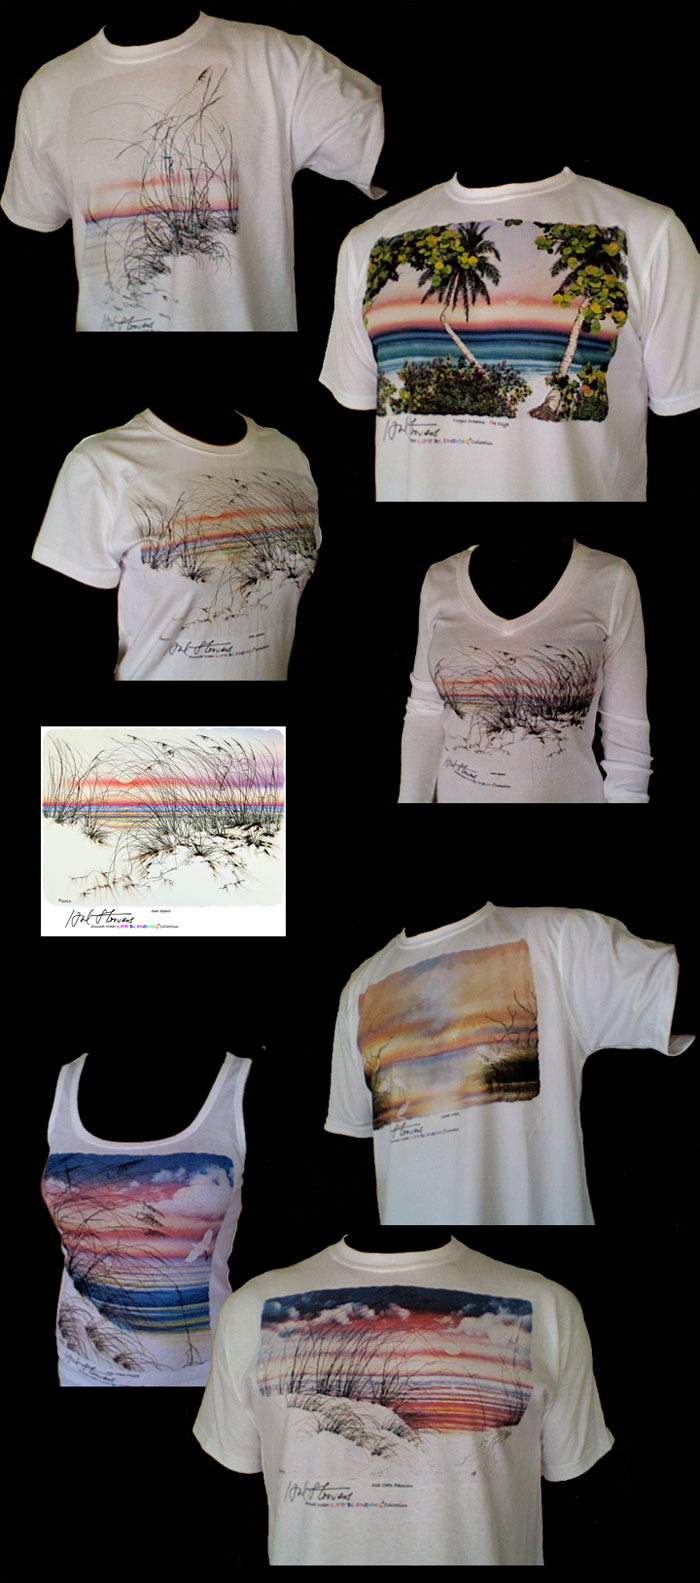 Apparel imprinted with original images by Hal Stowers, Florida environmental artist - Wearable Art from Hal Stowers Sunset Wear LIFE BLENDING® Collection - Images include 'This is Fun!" "Tropic Dreams," "Sea Space," "Great White," "Sea Oats Flight," "Sea Oats Passion."